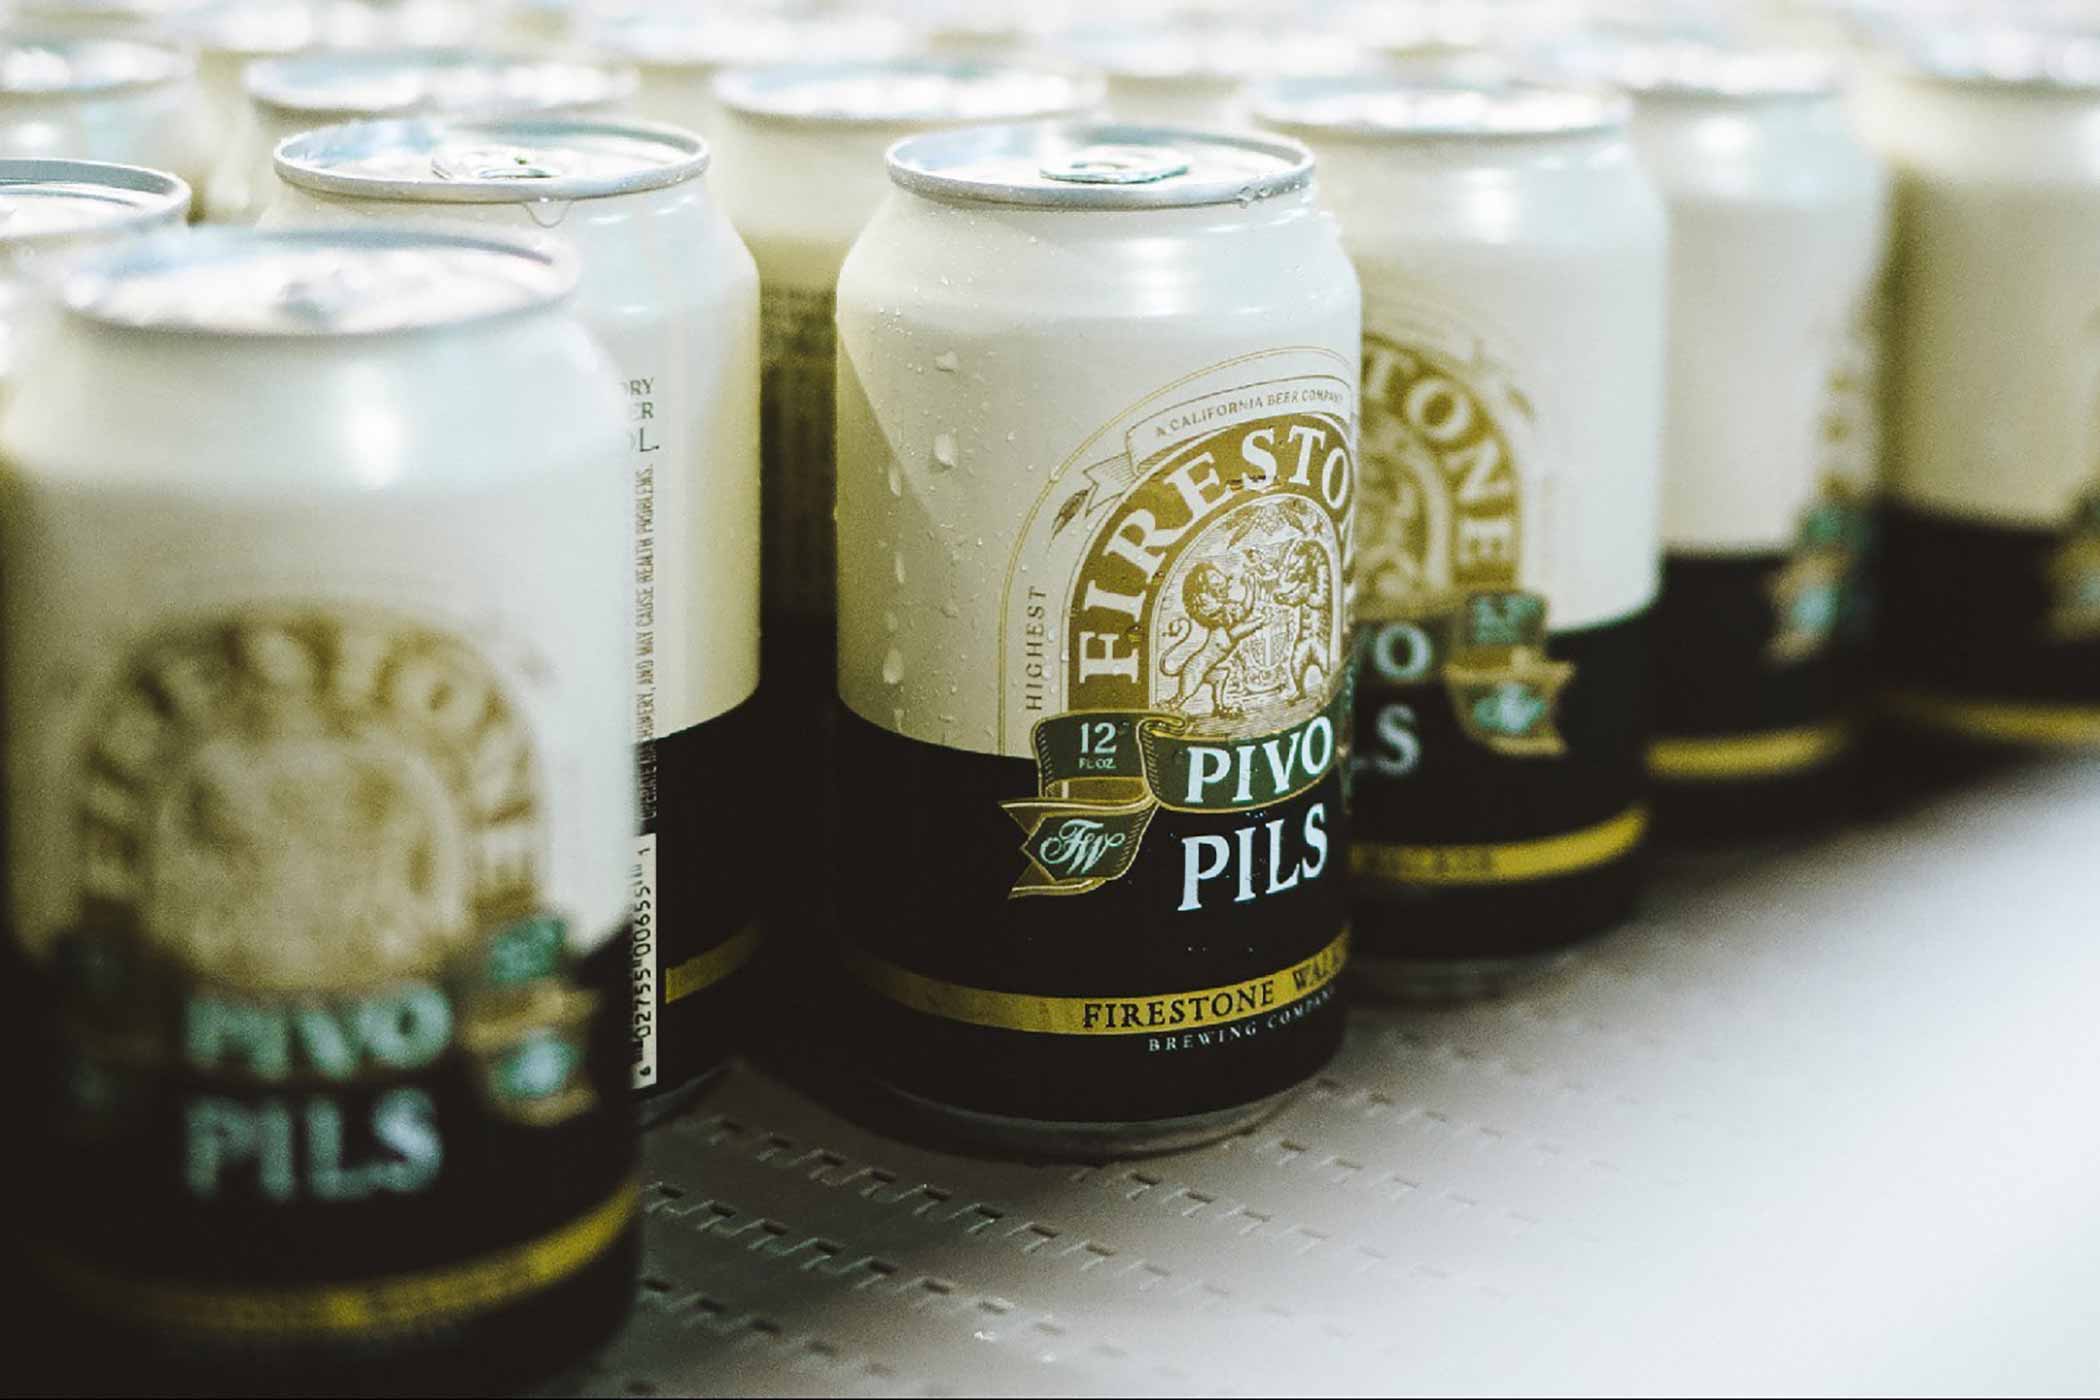 What Is an Italian Pilsner?